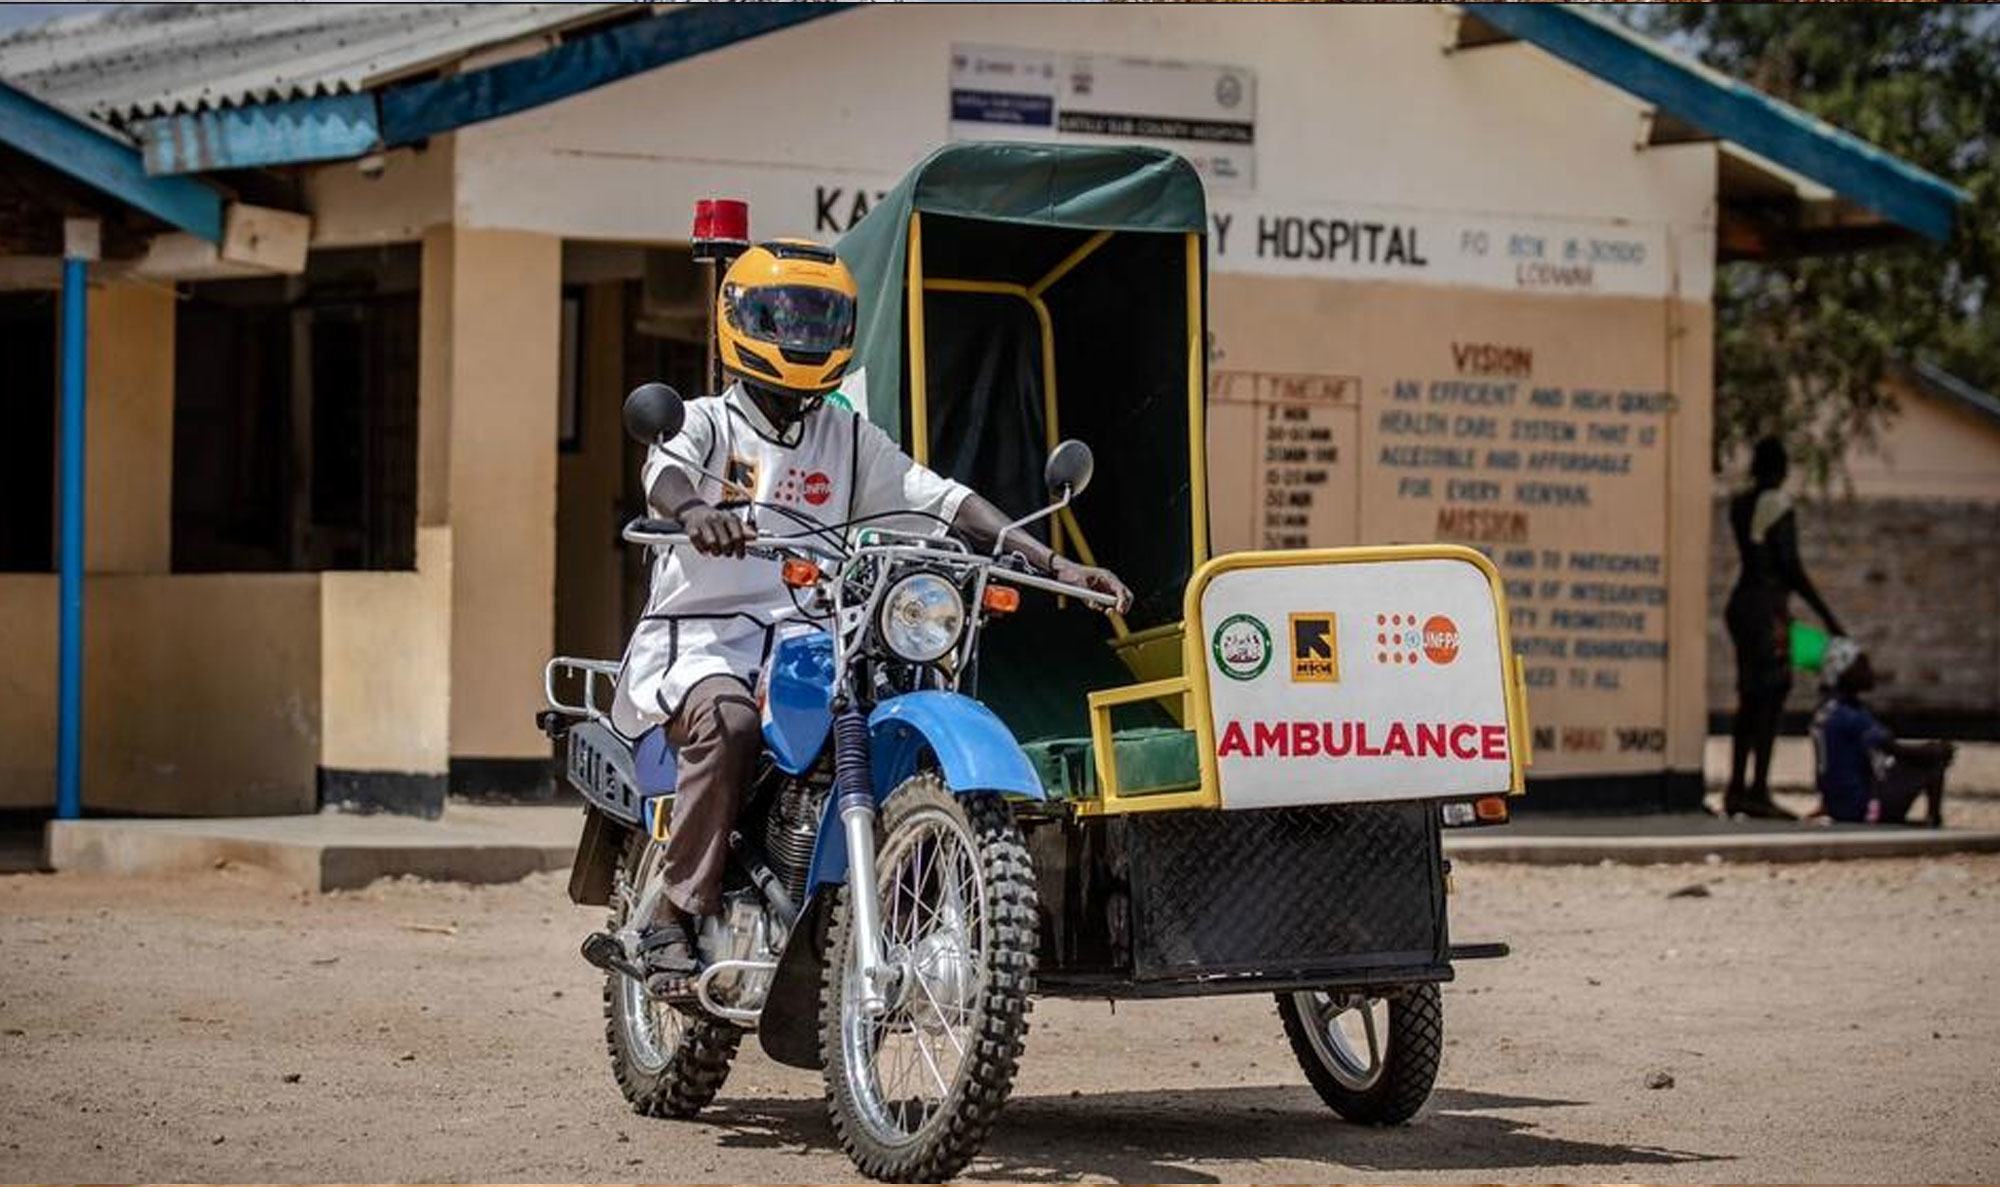 The ongoing drought has made it much harder for women in Turkana County, Kenya, to access essential health services – a dangerous situation that the UNFPA motorcycle ambulance is helping to address.